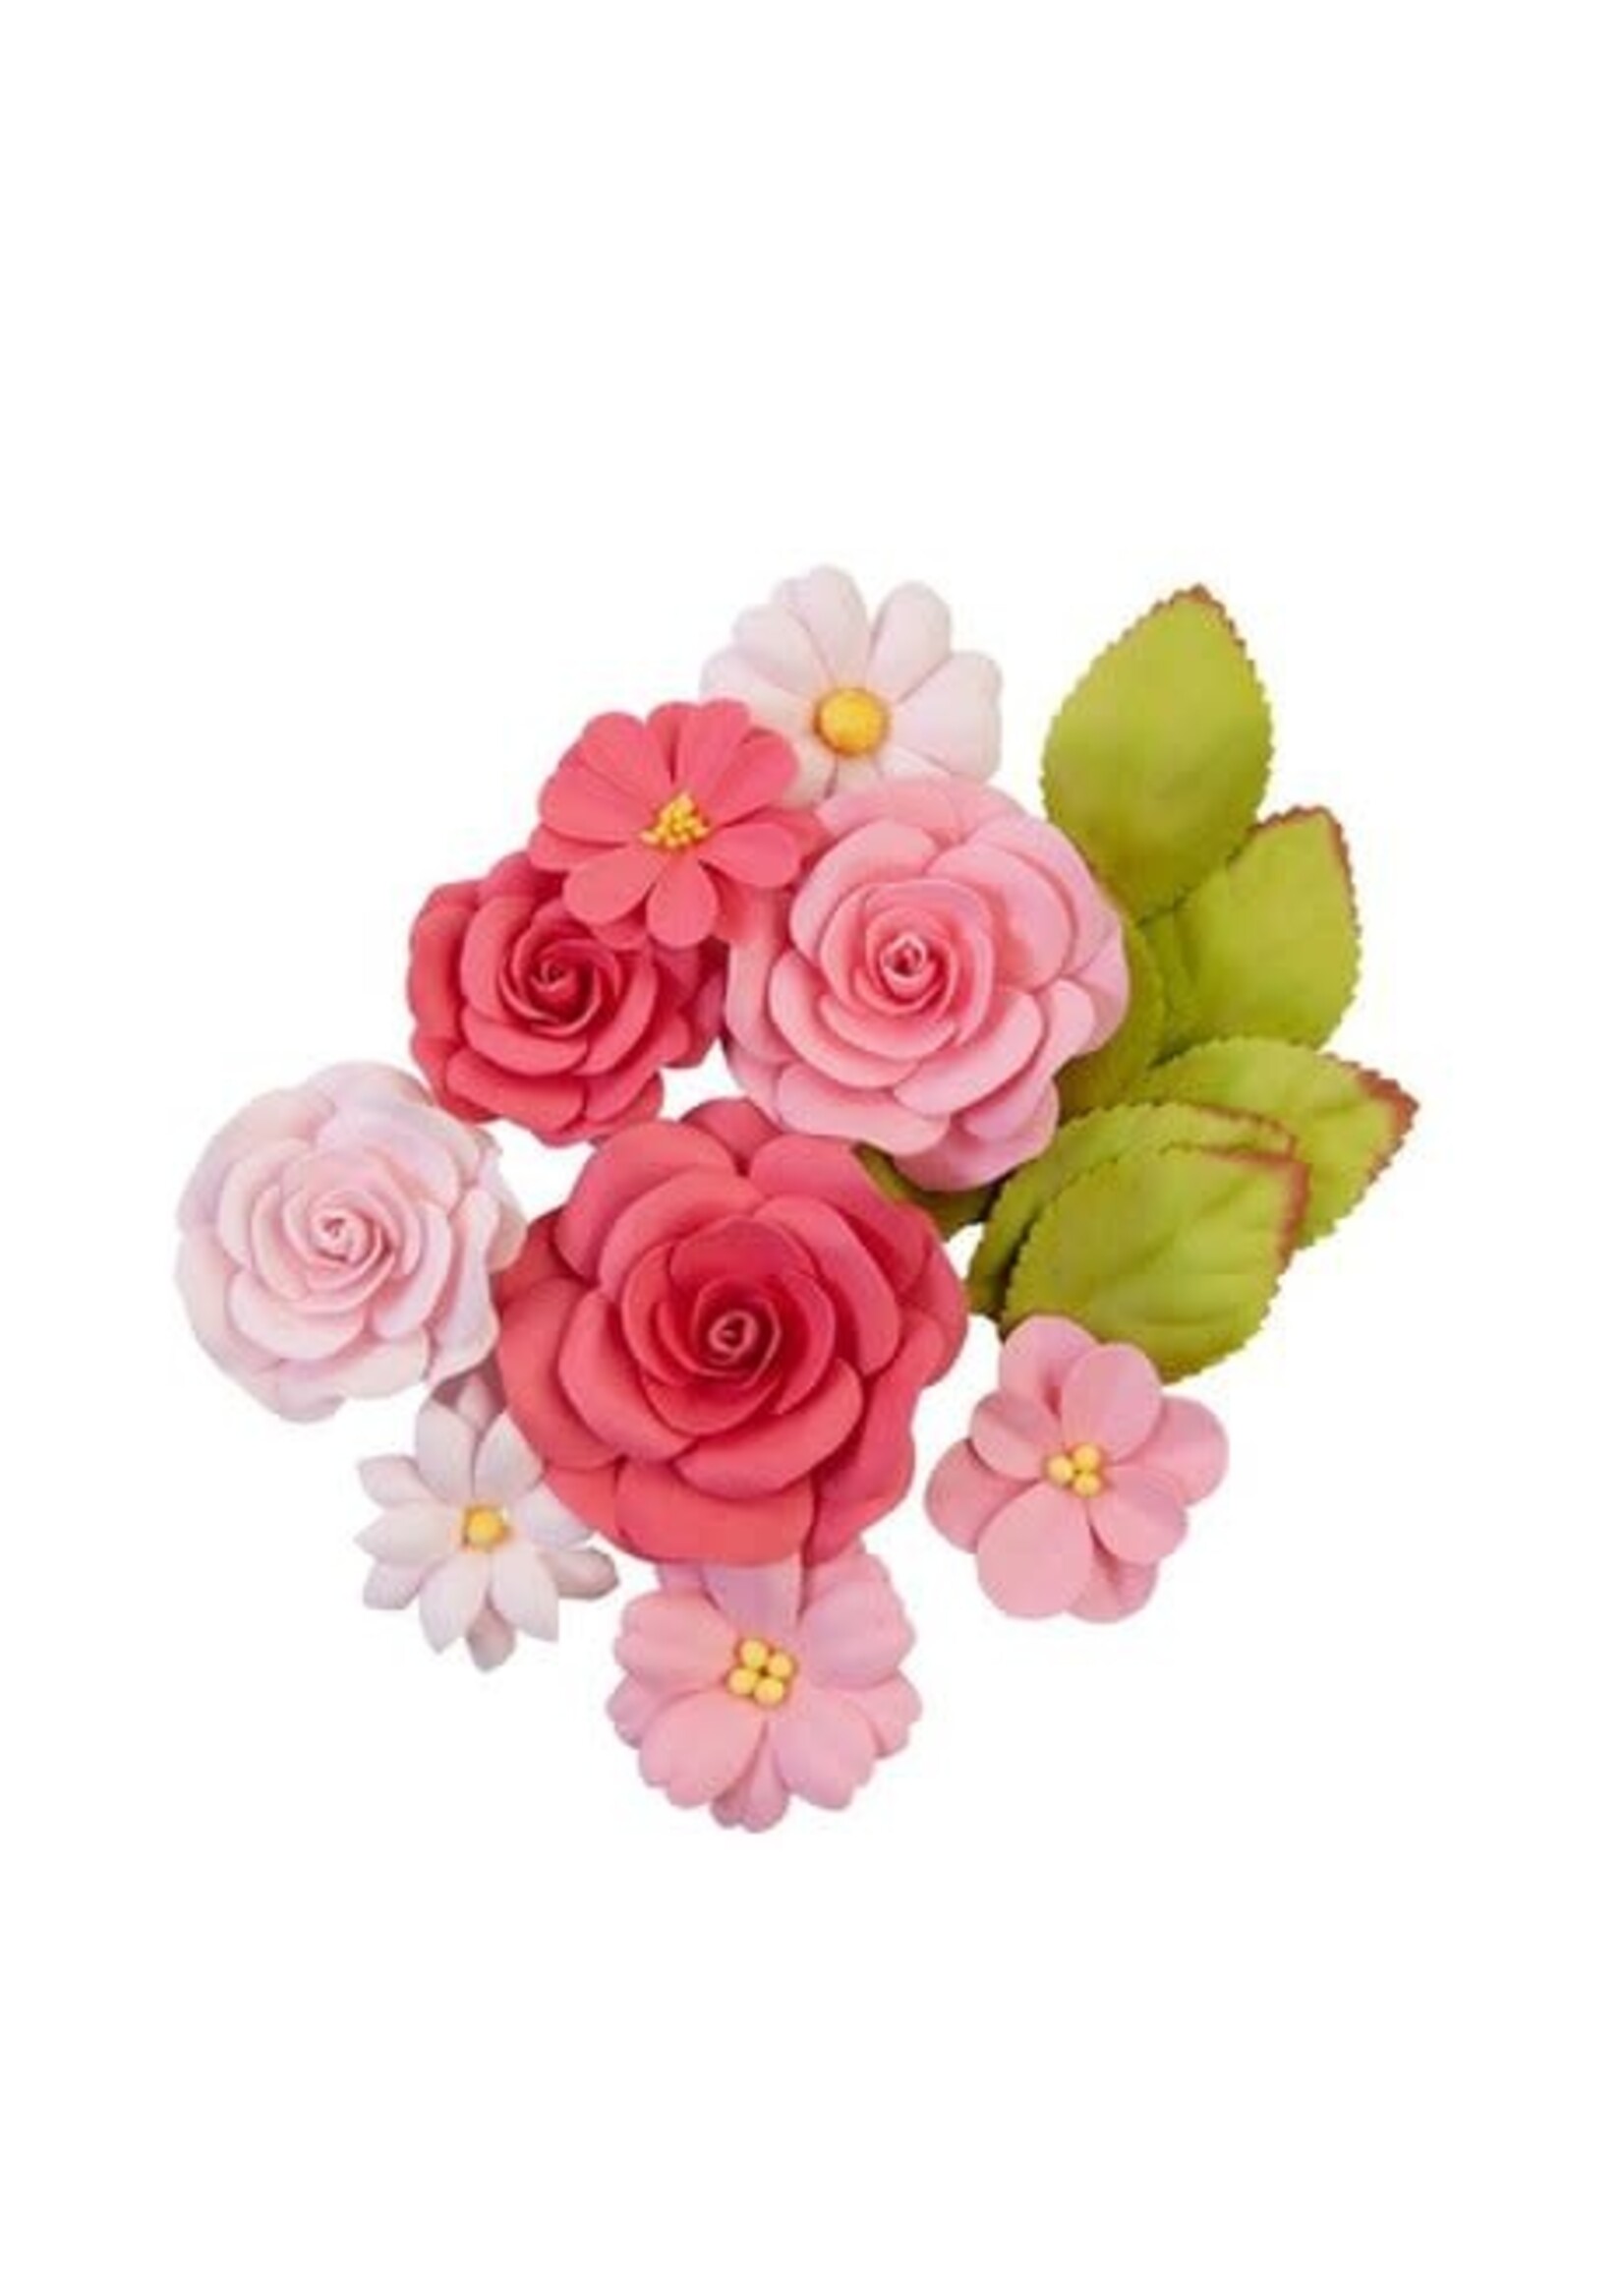 Painted Floral Flowers Rosy Hues (16pcs) (658540)